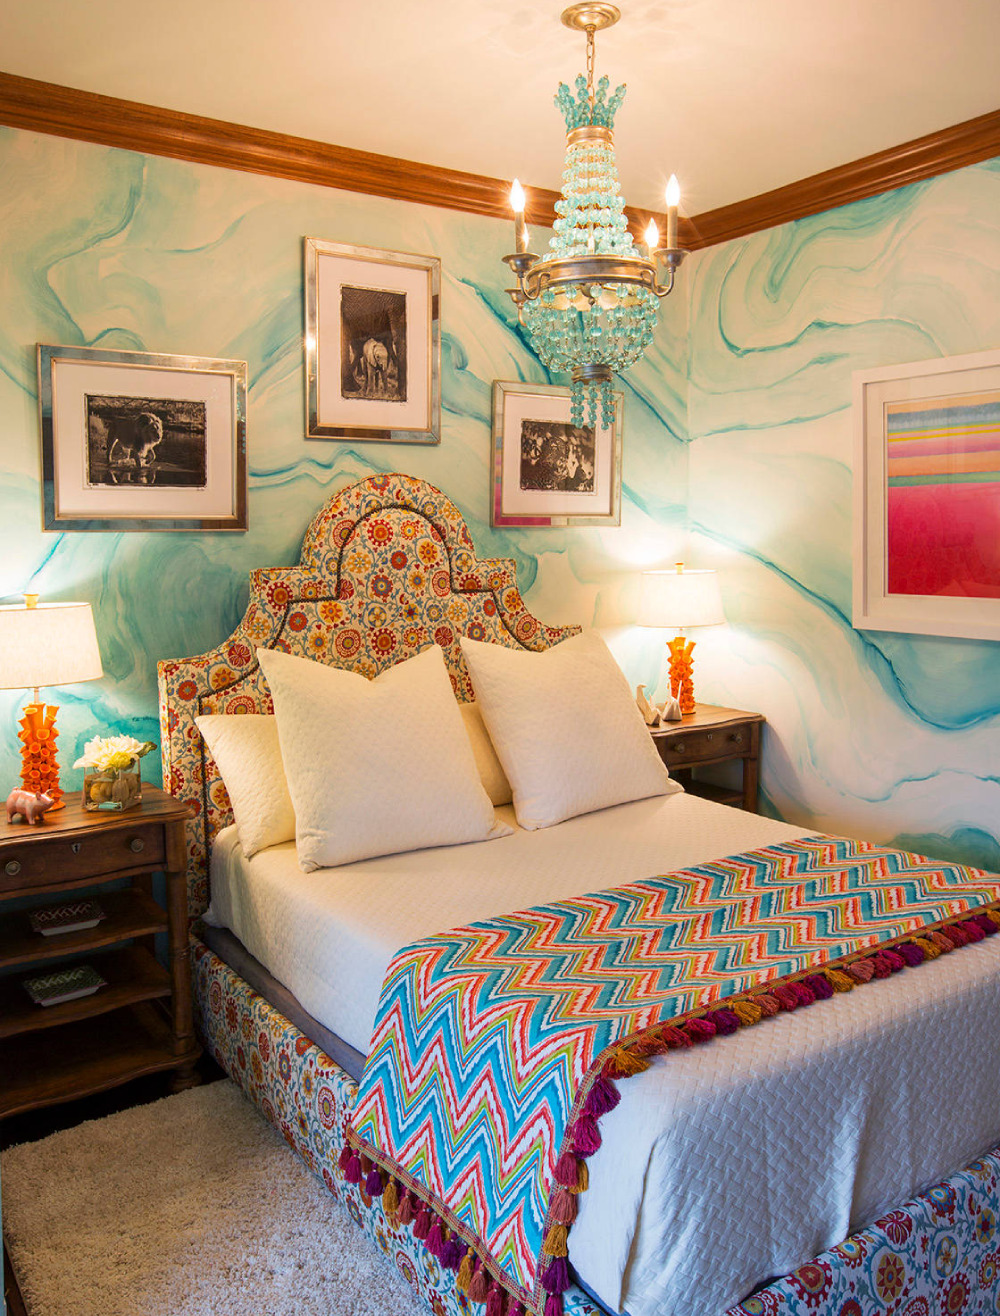 1-43-3 Colors That Go With Turquoise for a Room Decor